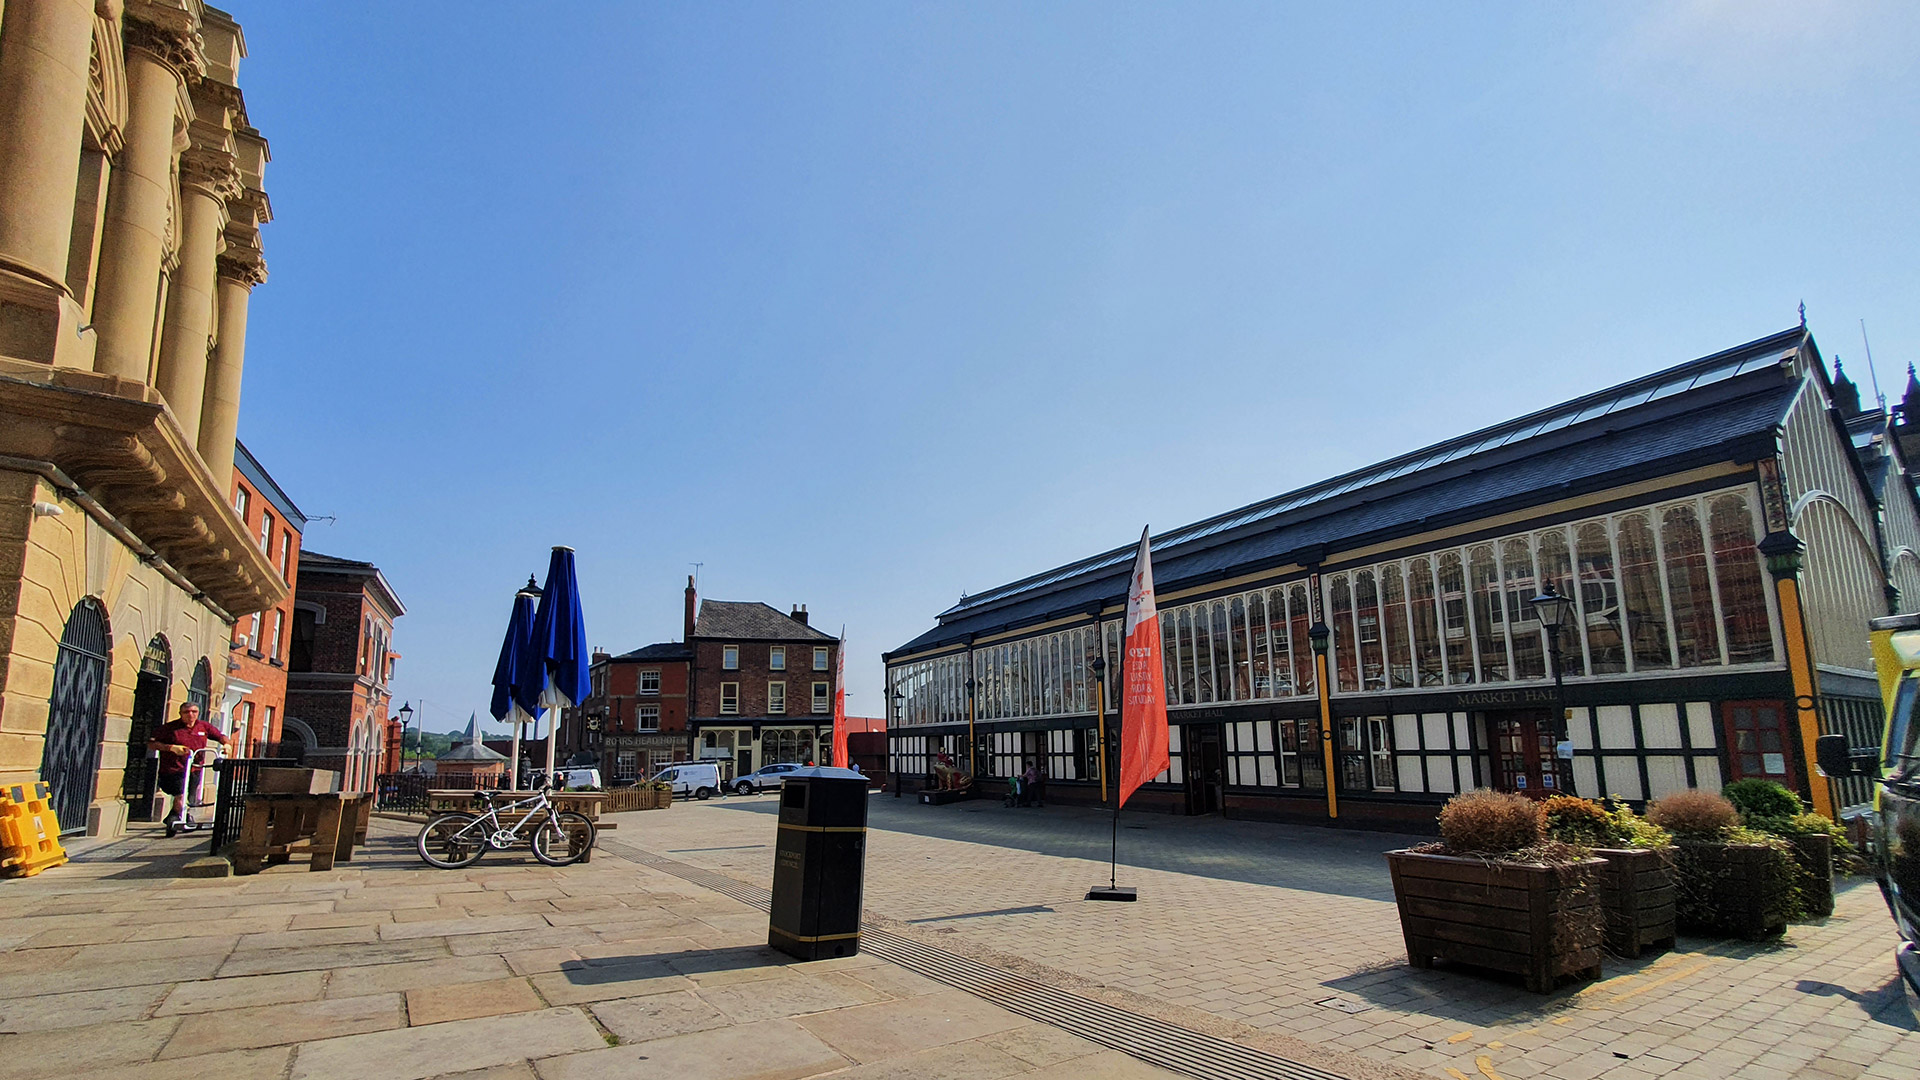 Have your say on proposals to improve experience for residents and visitors visiting Market Place and Underbanks